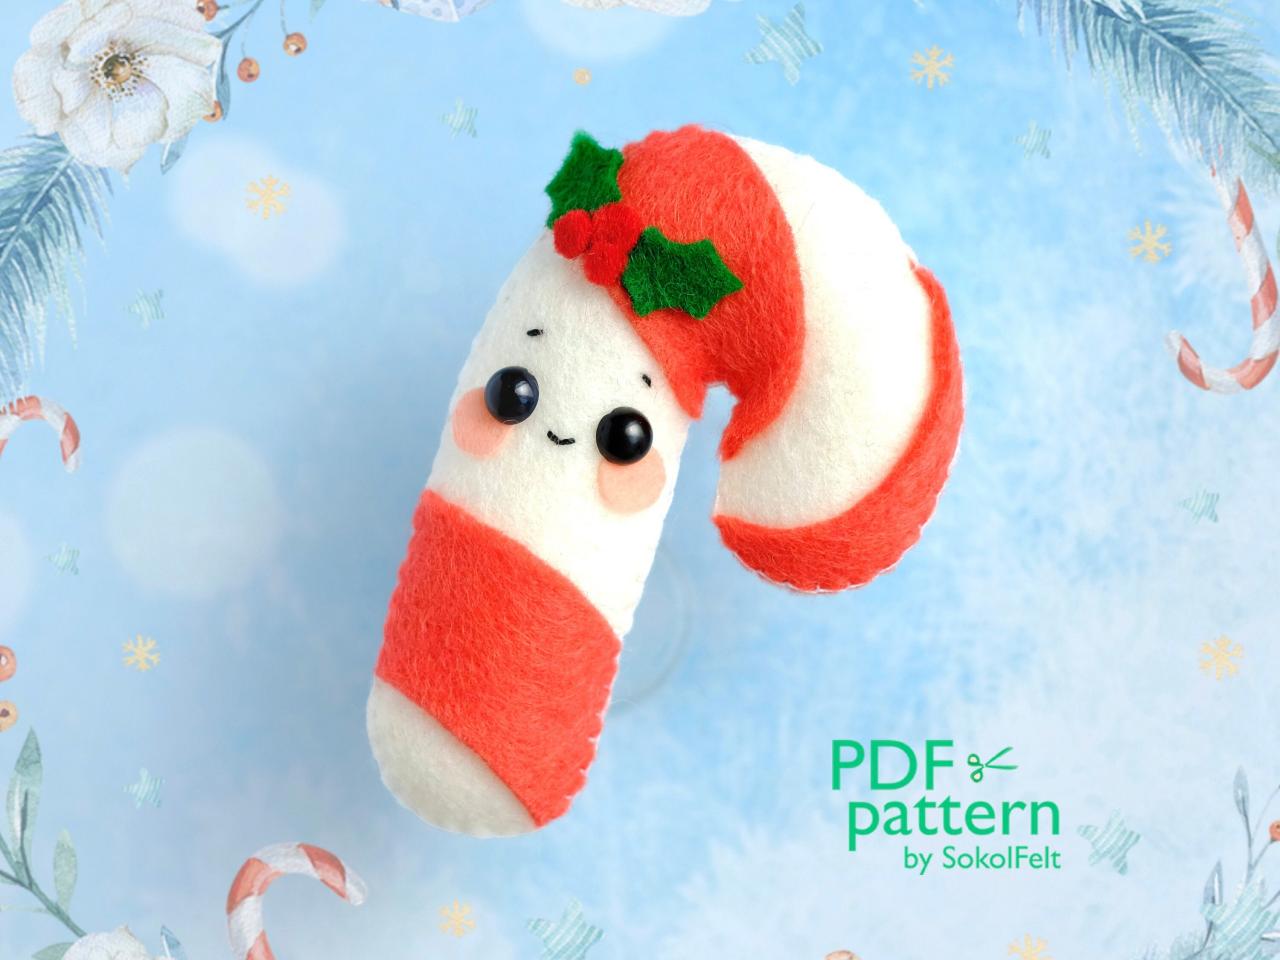 Christmas Candy Cane Felt Toy Pdf And Svg Patterns, Christmas Tree Ornament, Felt Baby Crib Mobile